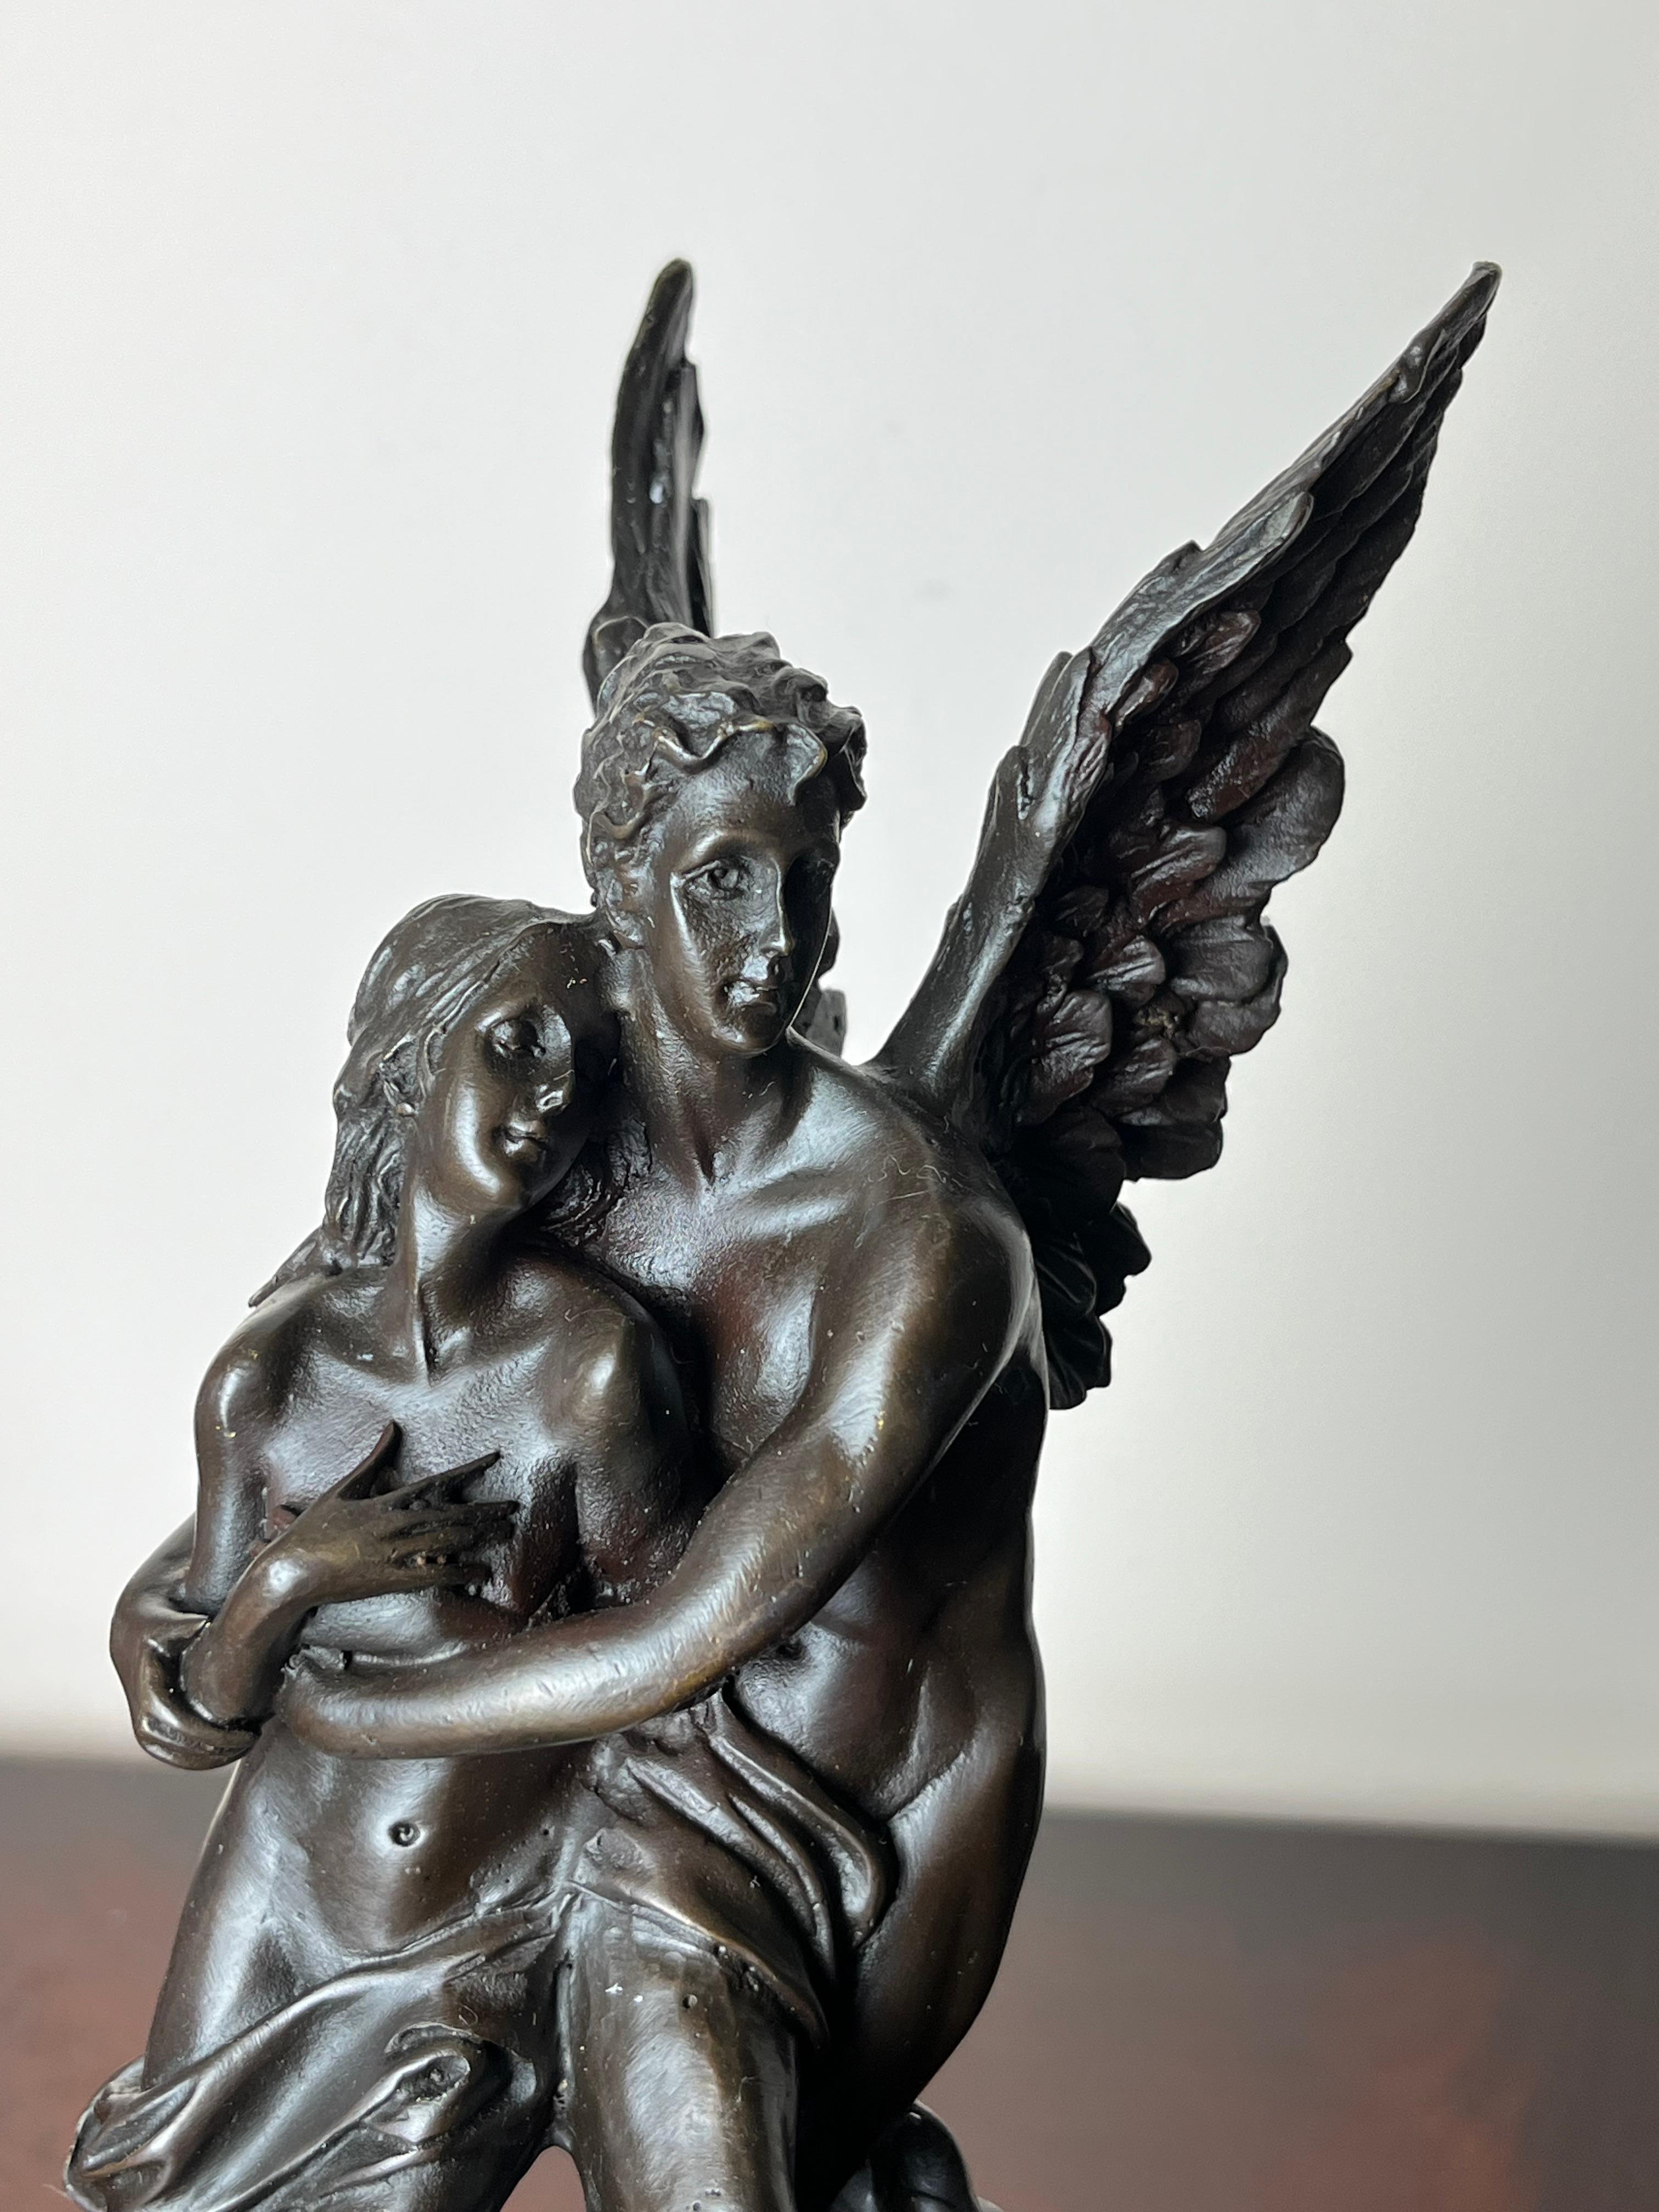 Very detailed statue of Cupid and Psyche, France, 1930s

Made of high quality bronze and positioned on a marble base. 30 cm high.

Figuratively speaking, love (Cupid) and the soul (